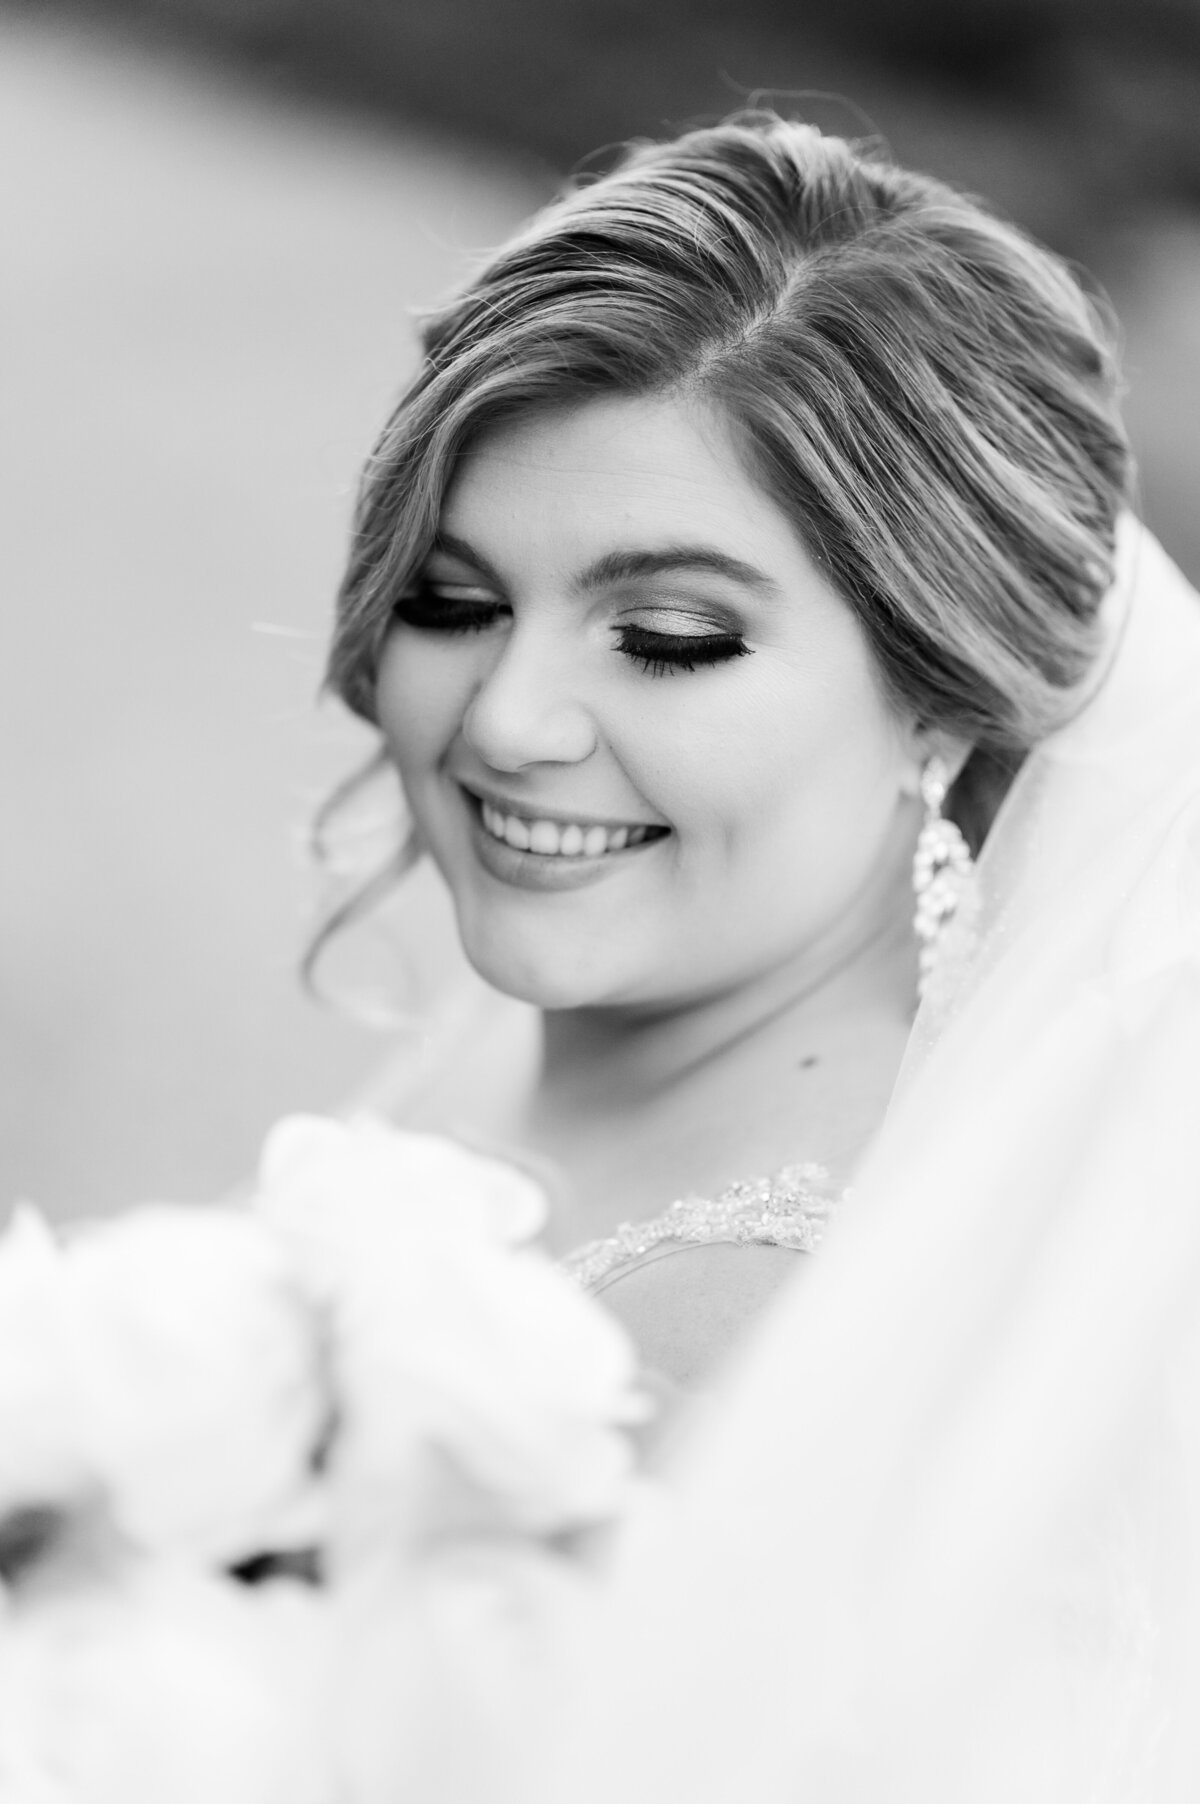 bridal portrait in black and white of bride wearing her veil and looking down at her bridal bouquet photographed by Little Rock wedding photographer